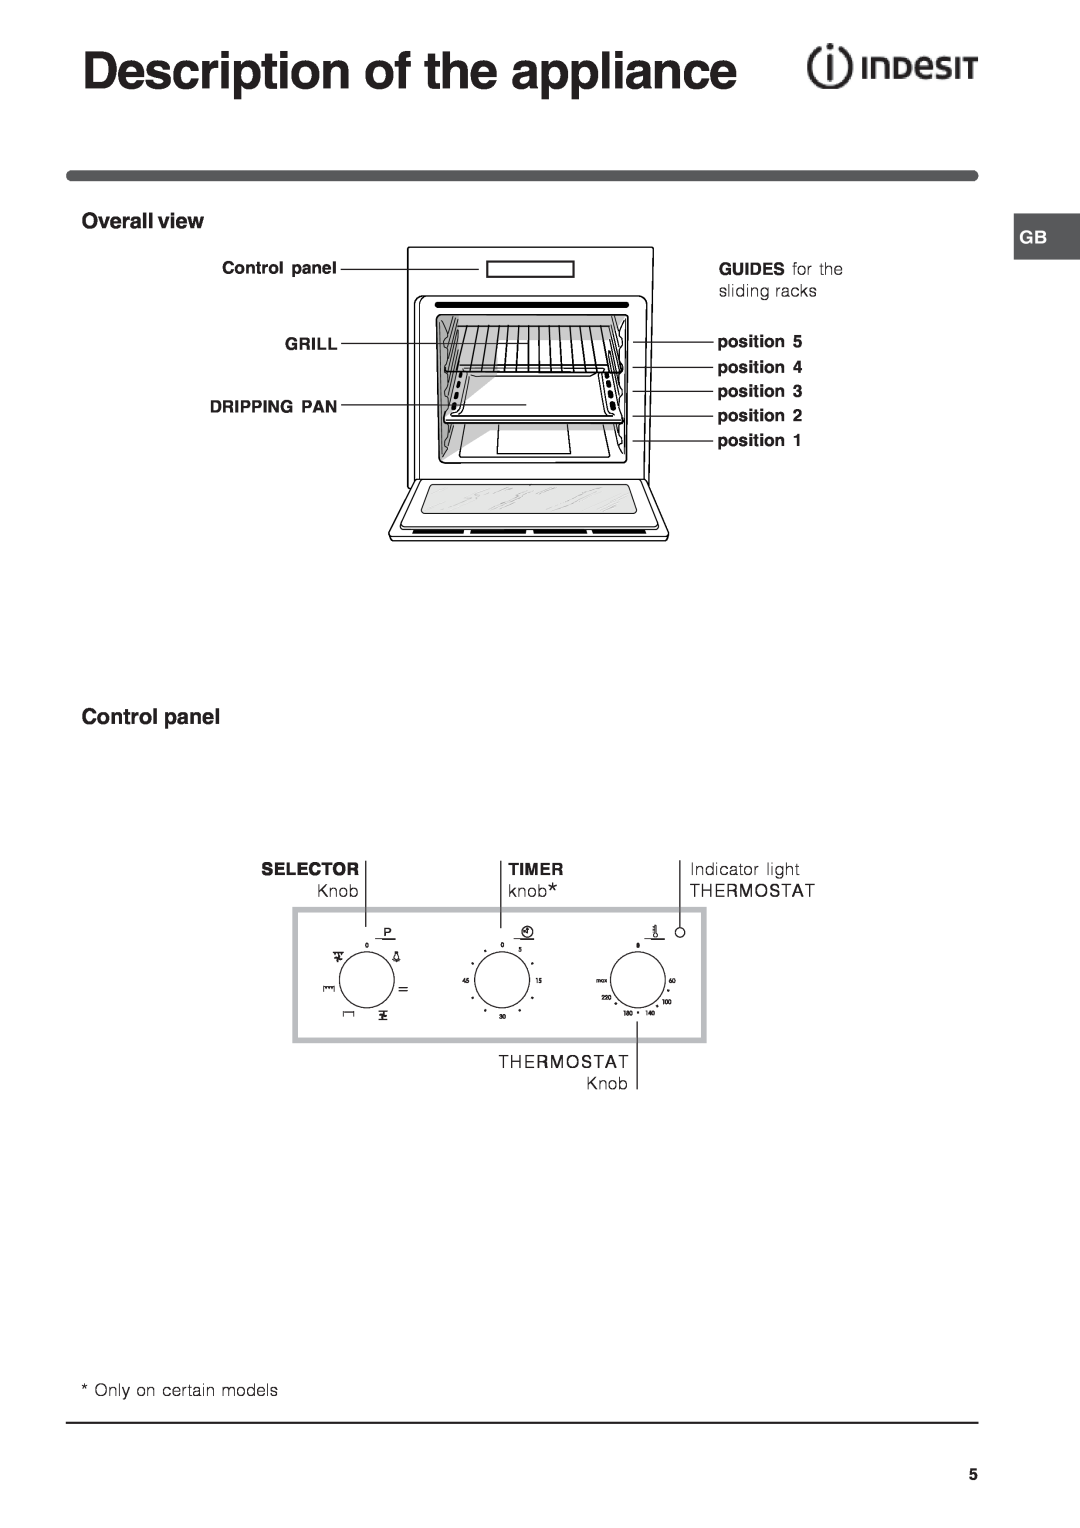 Indesit IFG Description of the appliance, Overall view, Control panel GRILL DRIPPING PAN, Selector, Timer, Thermostat 